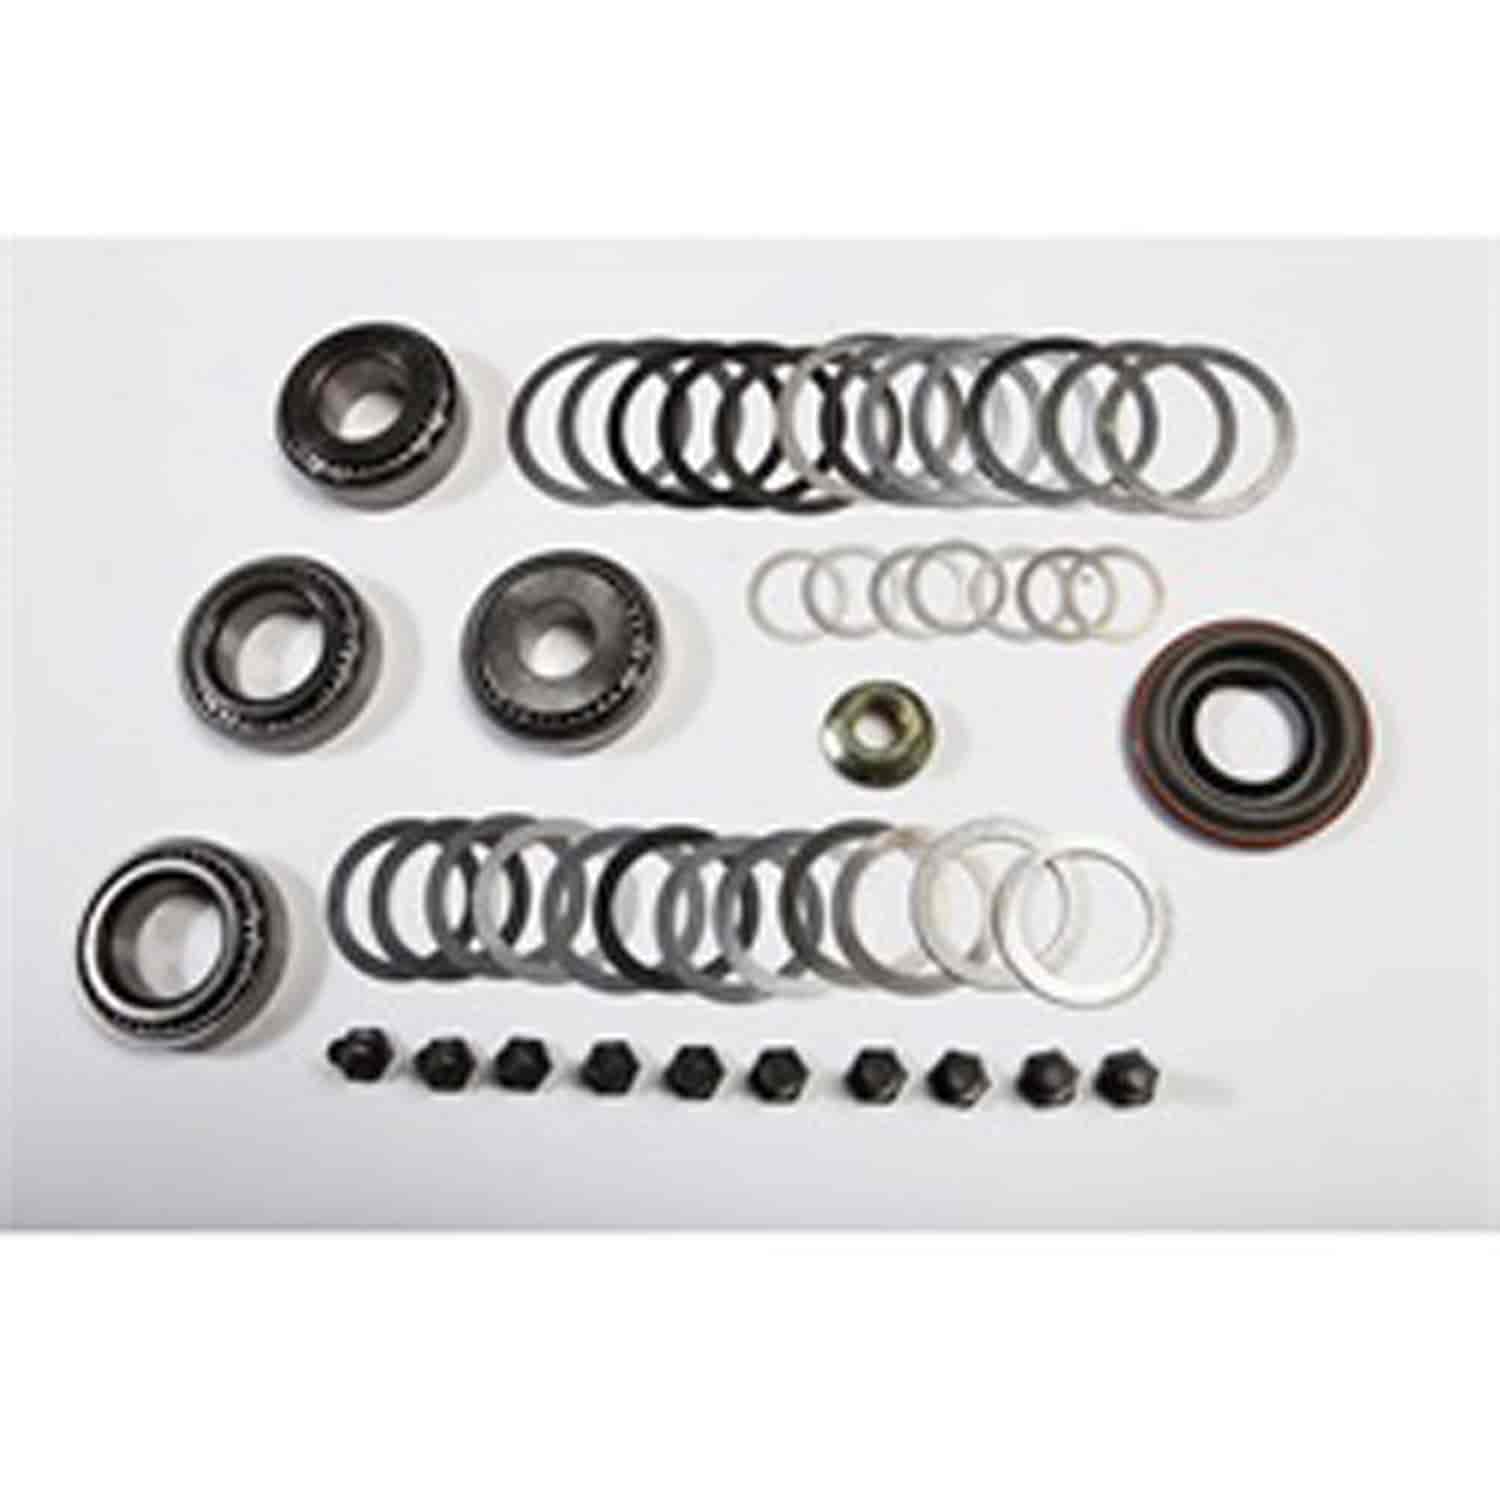 This differential rebuild kit for Dana 30 w/